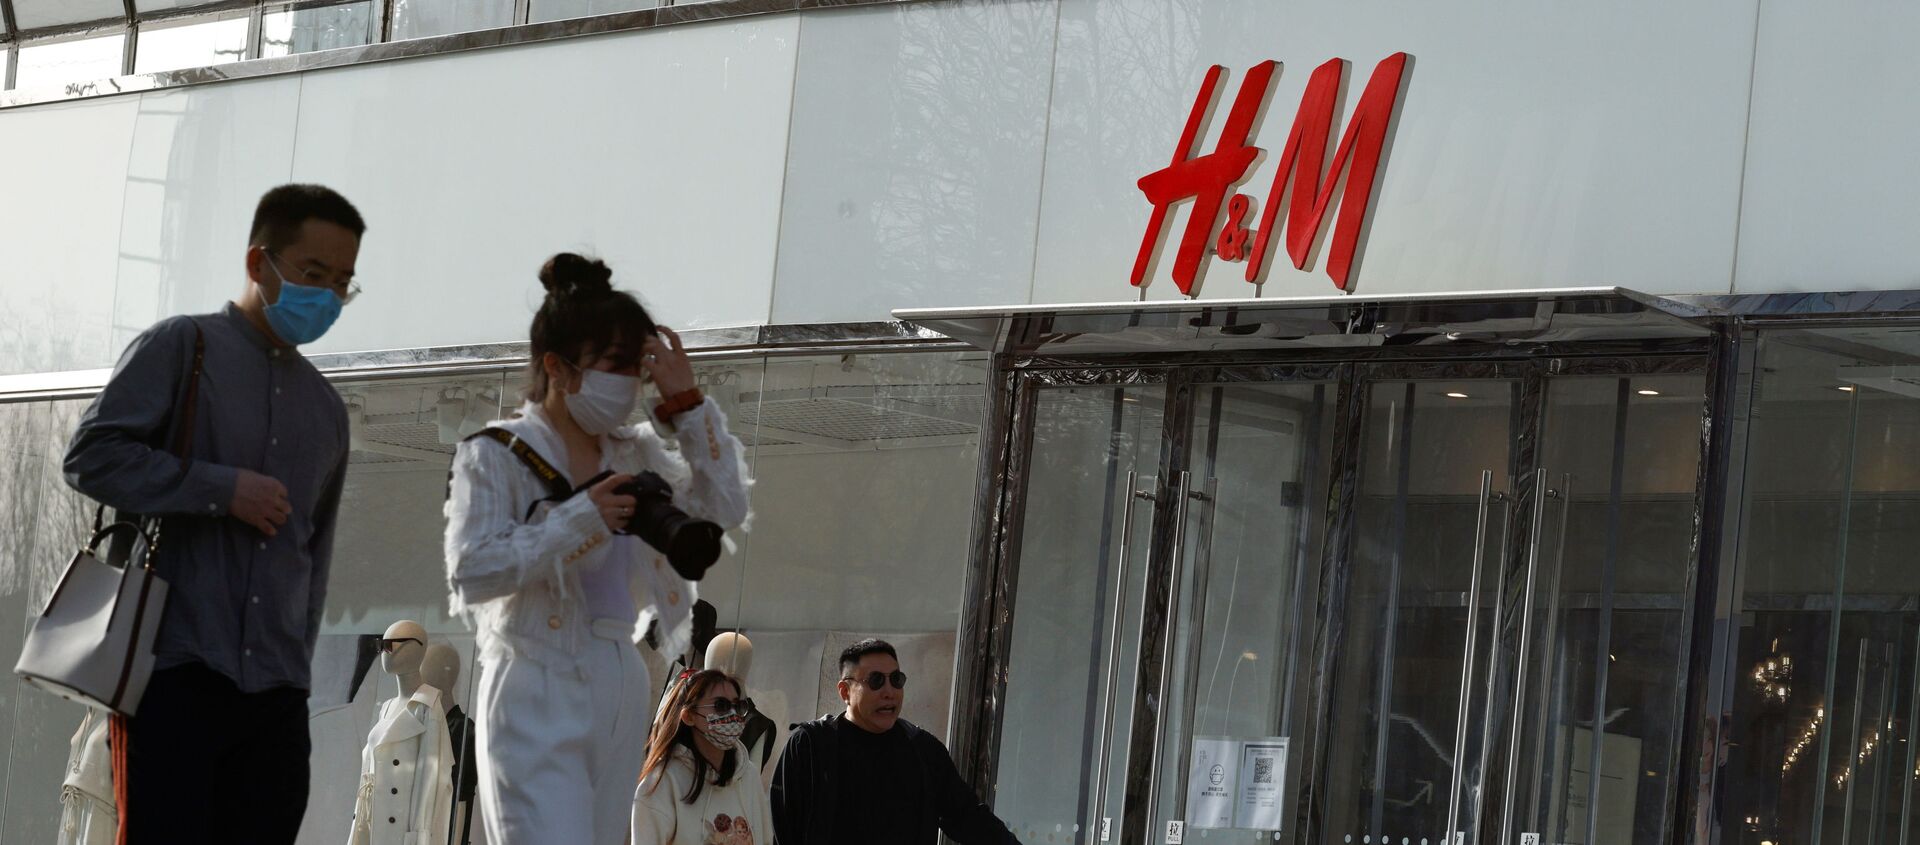 People walk past an H&M store in a shopping area in Beijing, China, 28 March 2021 - Sputnik International, 1920, 29.03.2021